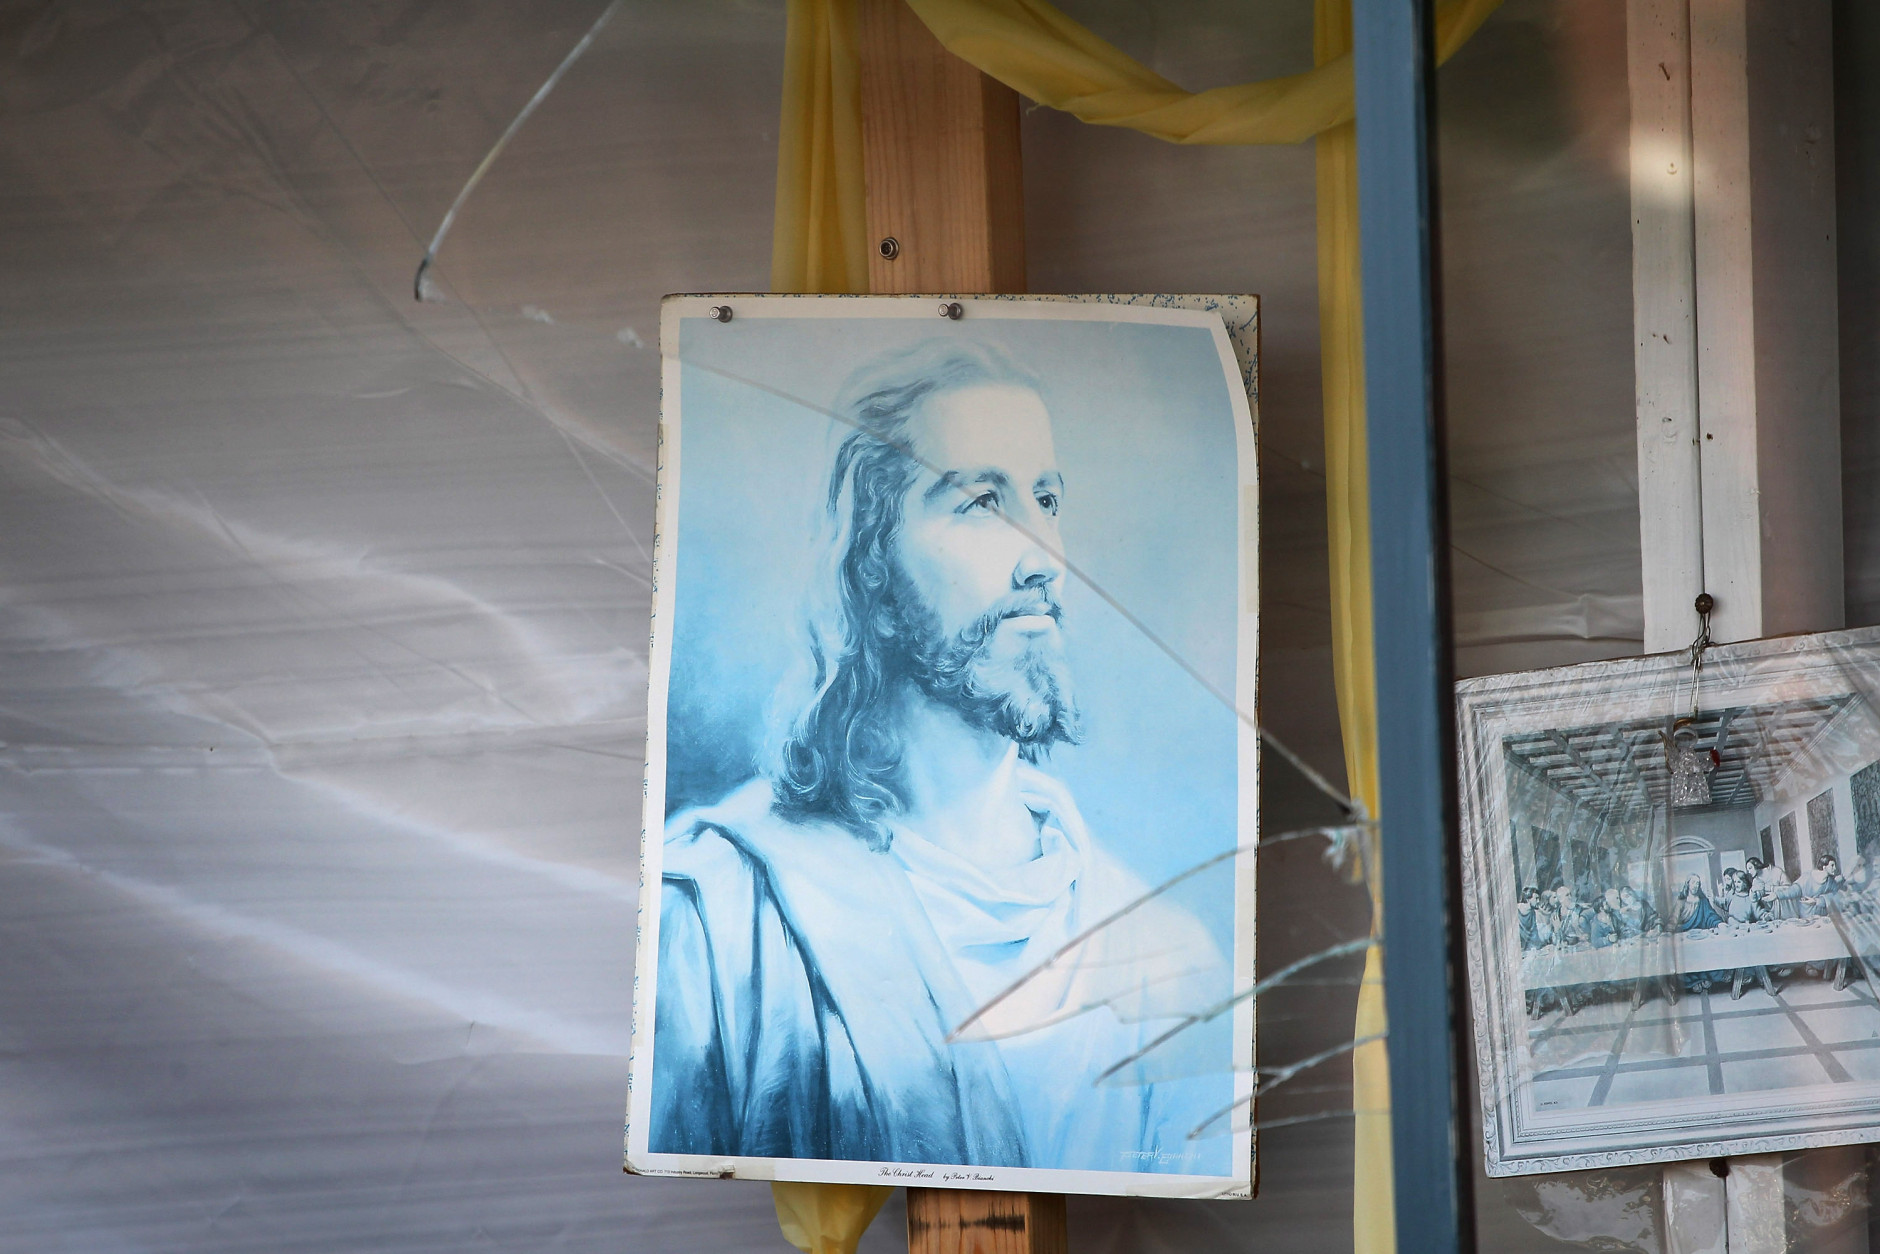 MINERAL, VA - AUGUST 24: A faded picture of Jesus hangs behind a window of a storefront shattered by yesterday's 5.8 earthquake August 24, 2011 in Mineral, Virginia. The epicenter of the quake, the East Coast's largest since 1944, was located a few miles outside of Mineral, a town of 430 people located about 50 miles west of Richmond.  (Photo by Scott Olson/Getty Images)